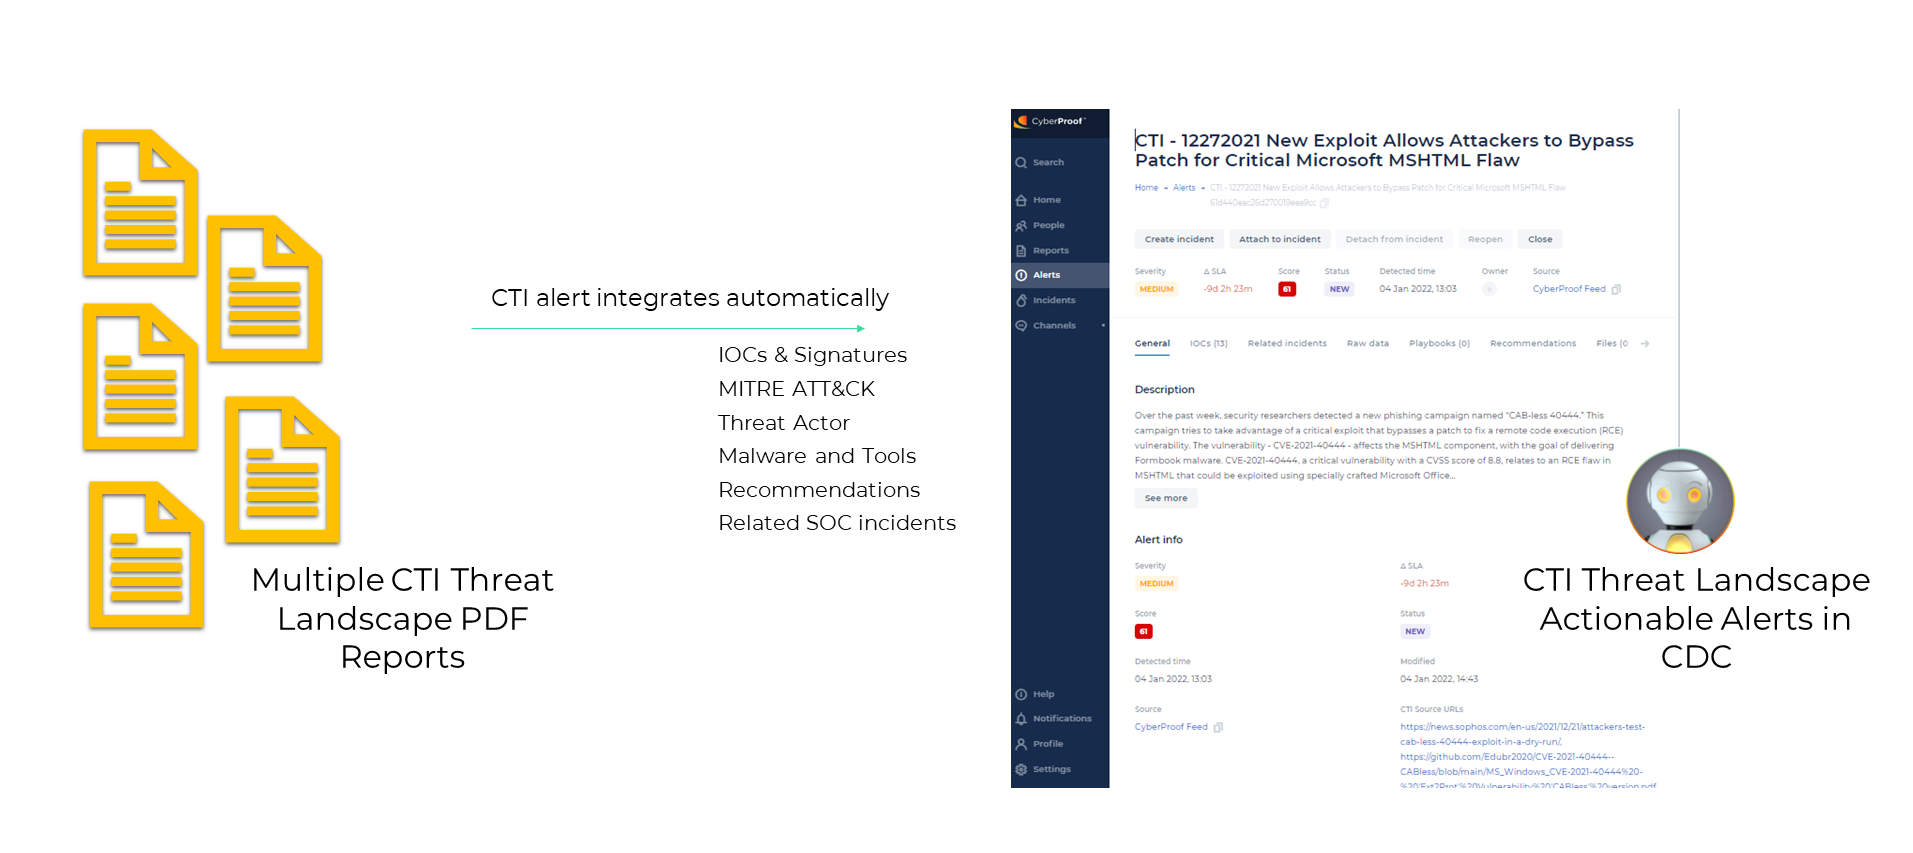 Visibility into Threat Coverage with CTI Alert Integration